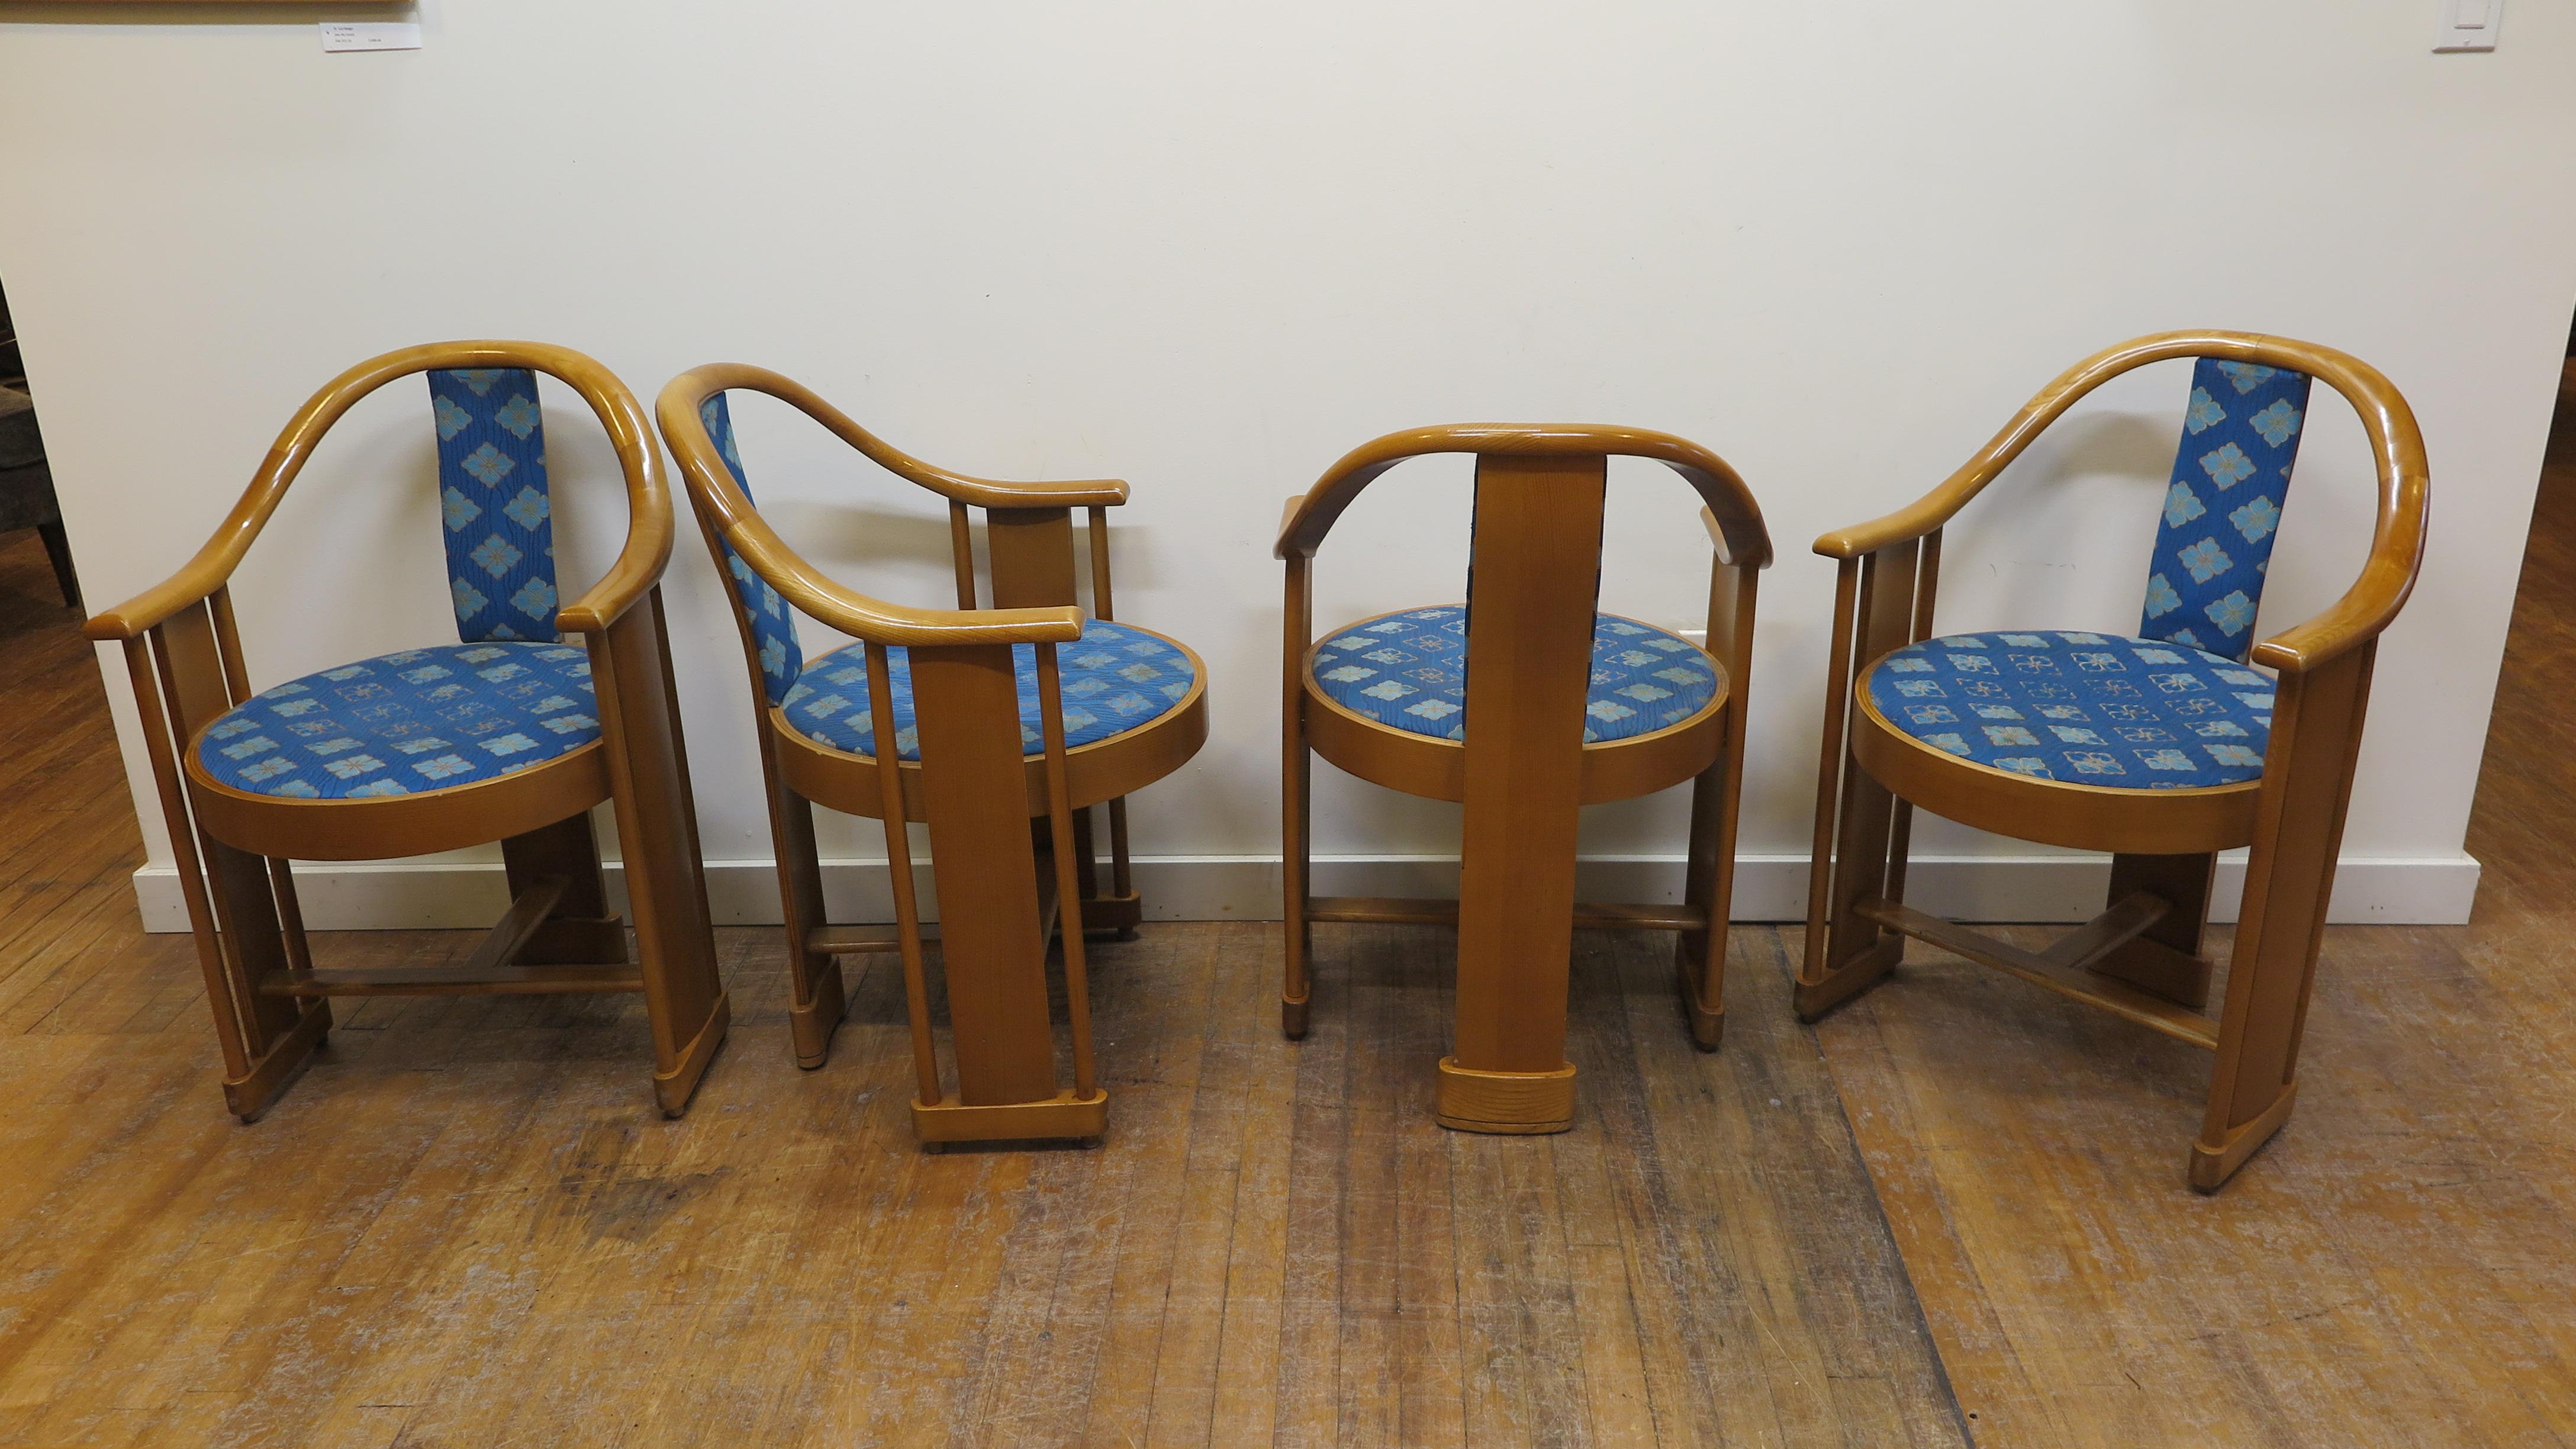 Set of four deco inspired bentwood round back chairs by Colber & Trocadero, Italy.
Colber & Trocadero makers of high end furniture, became Colber of Italy in 1979. Chairs are in good condition some dings to the wood and we recommend recovering,